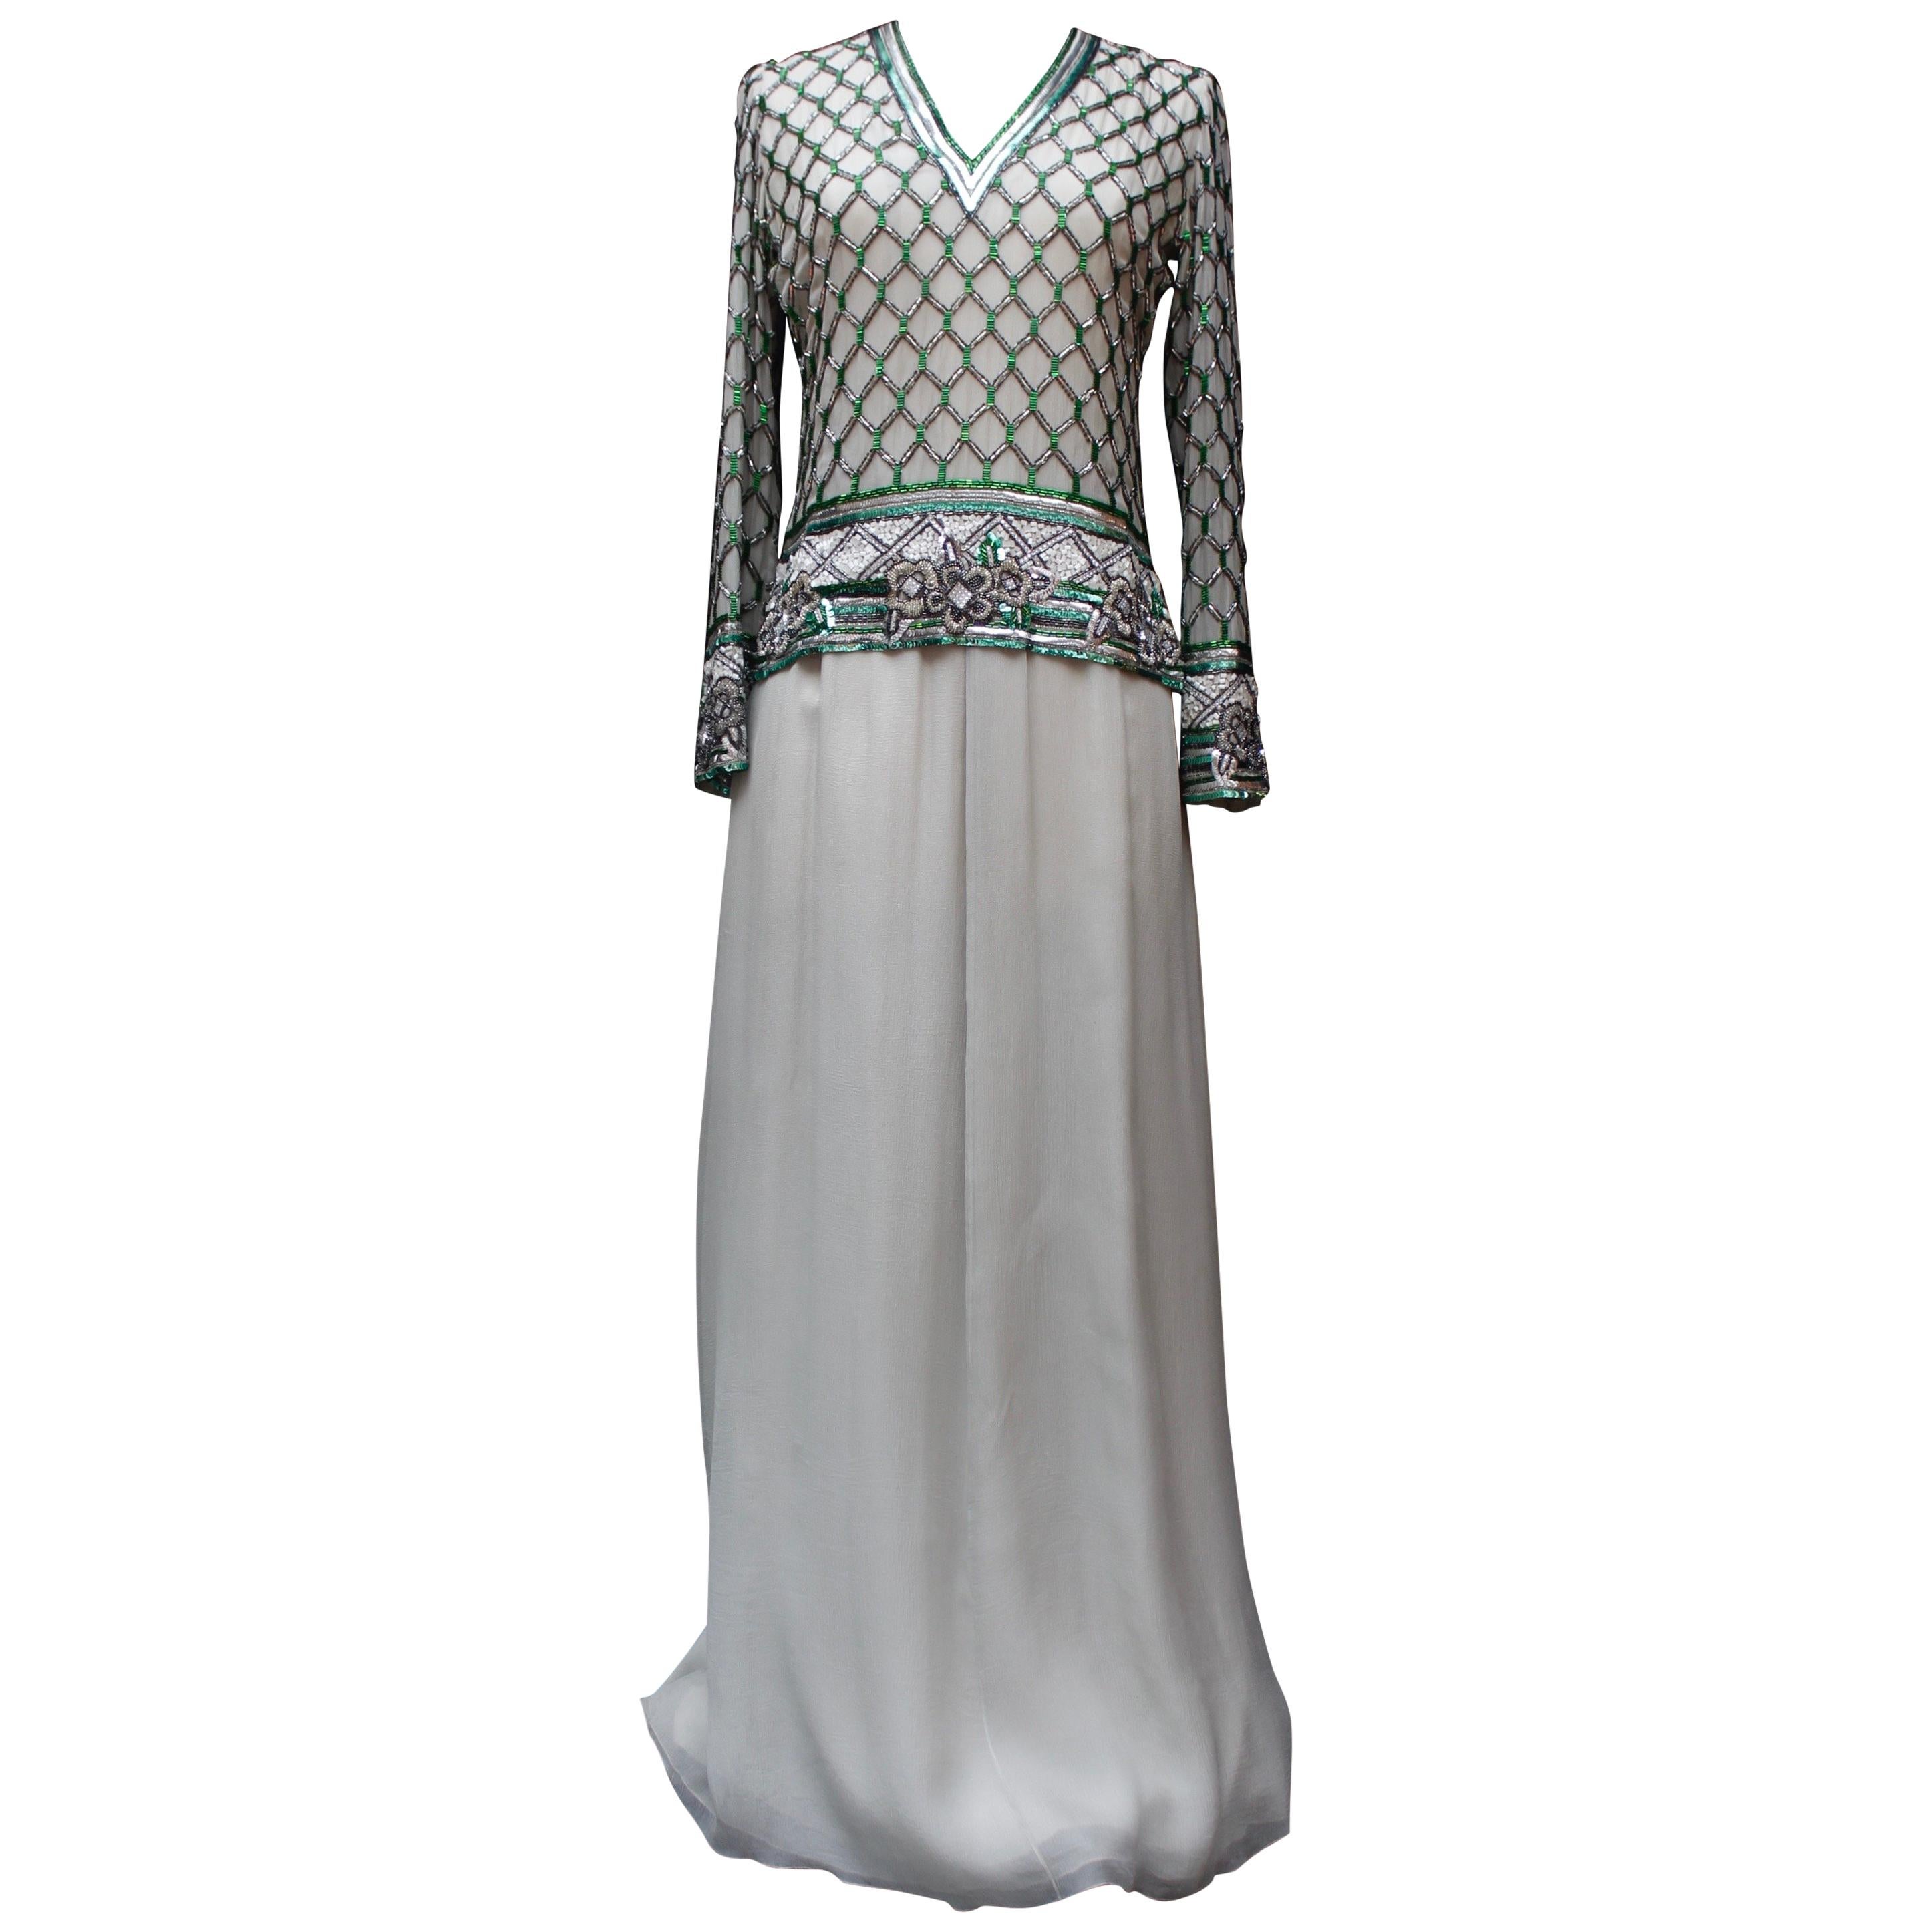 Christian Dior Haute Couture gorgeous set composed of grey chiffon and beads For Sale